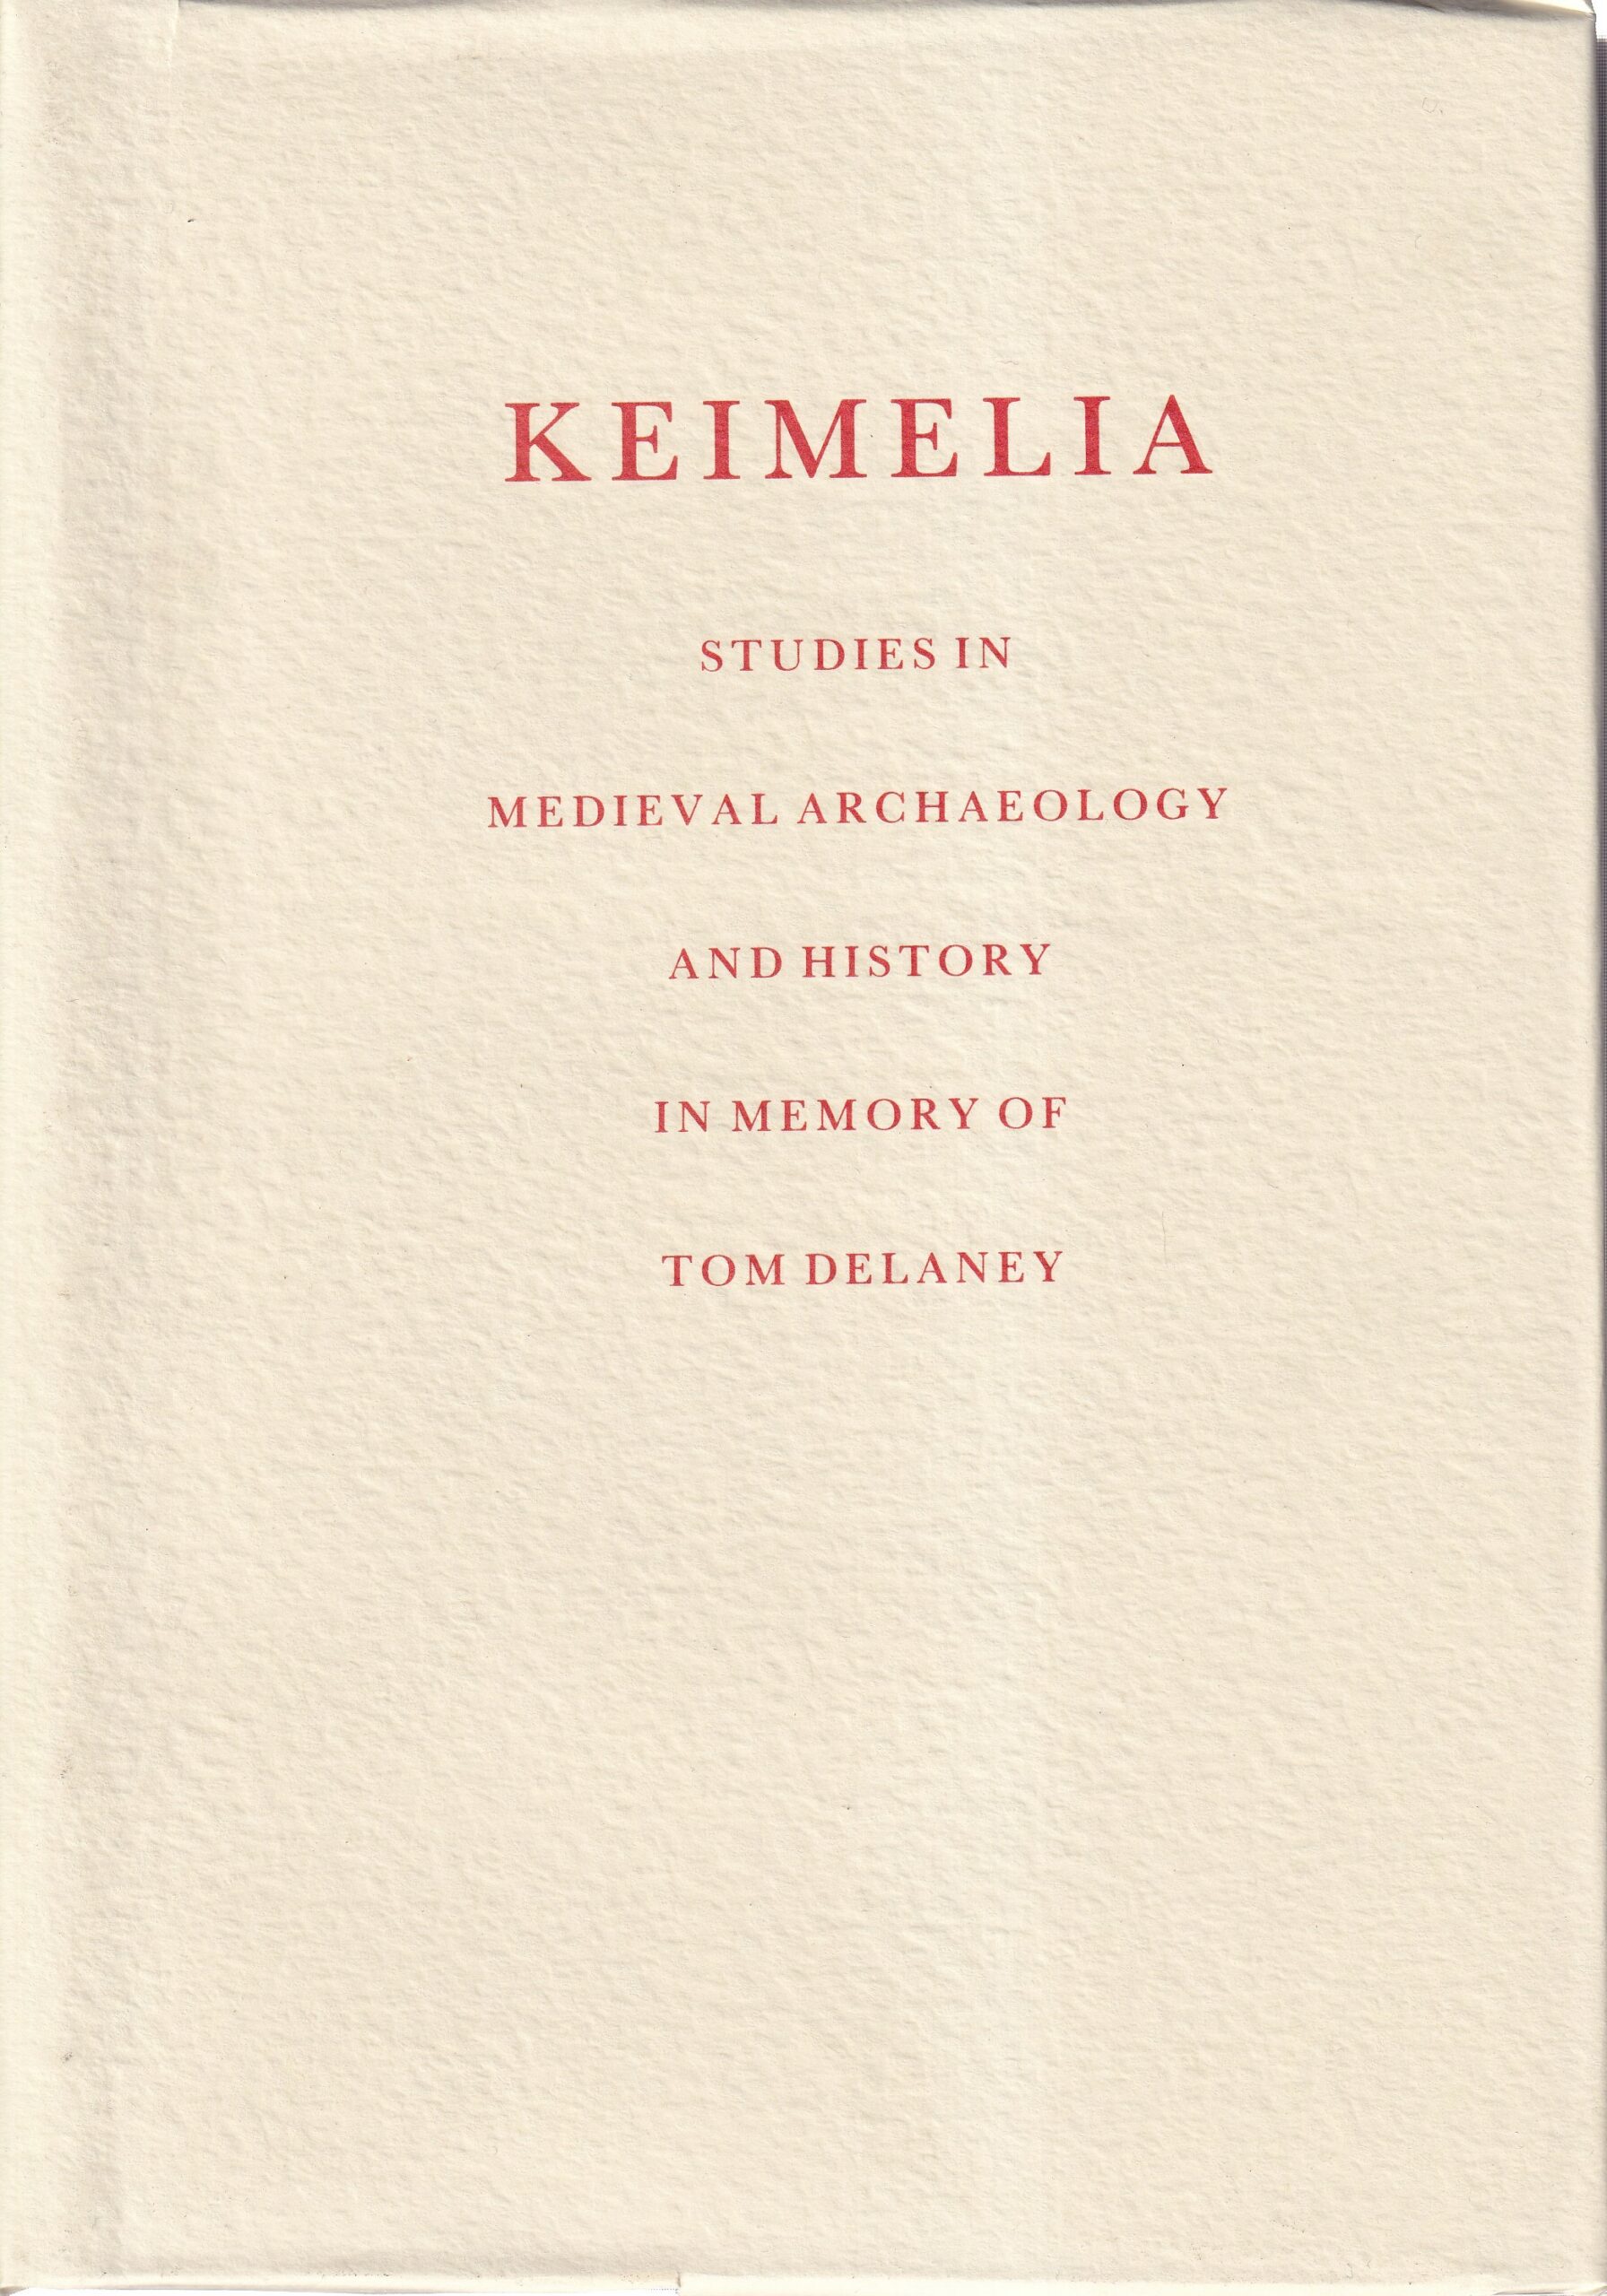 Keimelia: Studies in Medieval Archaeology and History in Memory of Tom Delaney by Gearóid Mac Niocaill and Patrick F. Wallace (eds.)